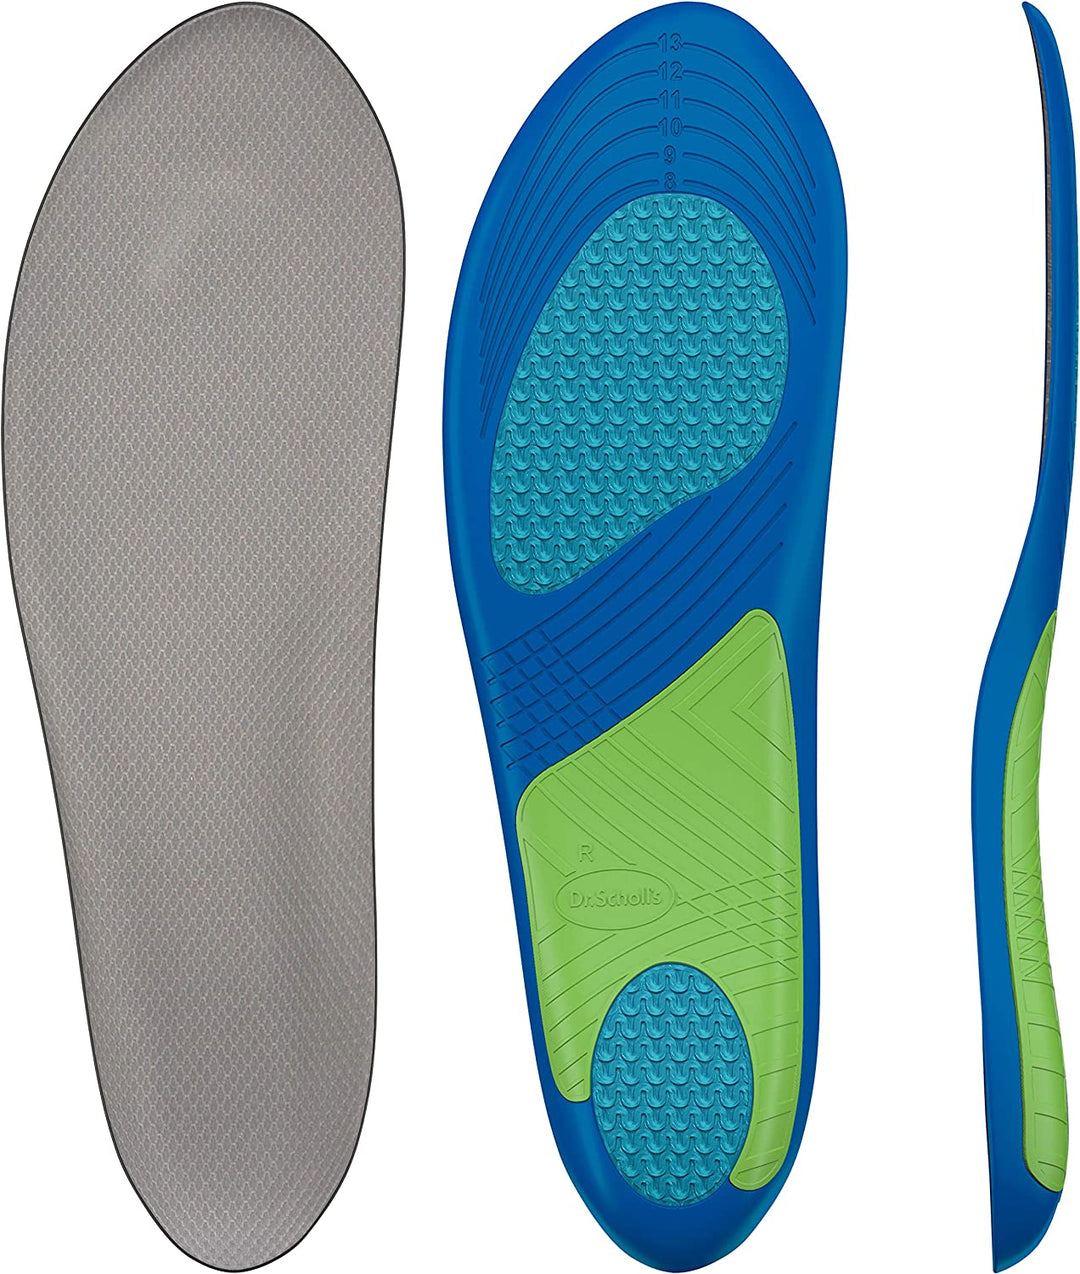 Dr. Scholl's All-Purpose Sport & Fitness Comfort Insoles 1 Pair, Trim to Fit - 3alababak